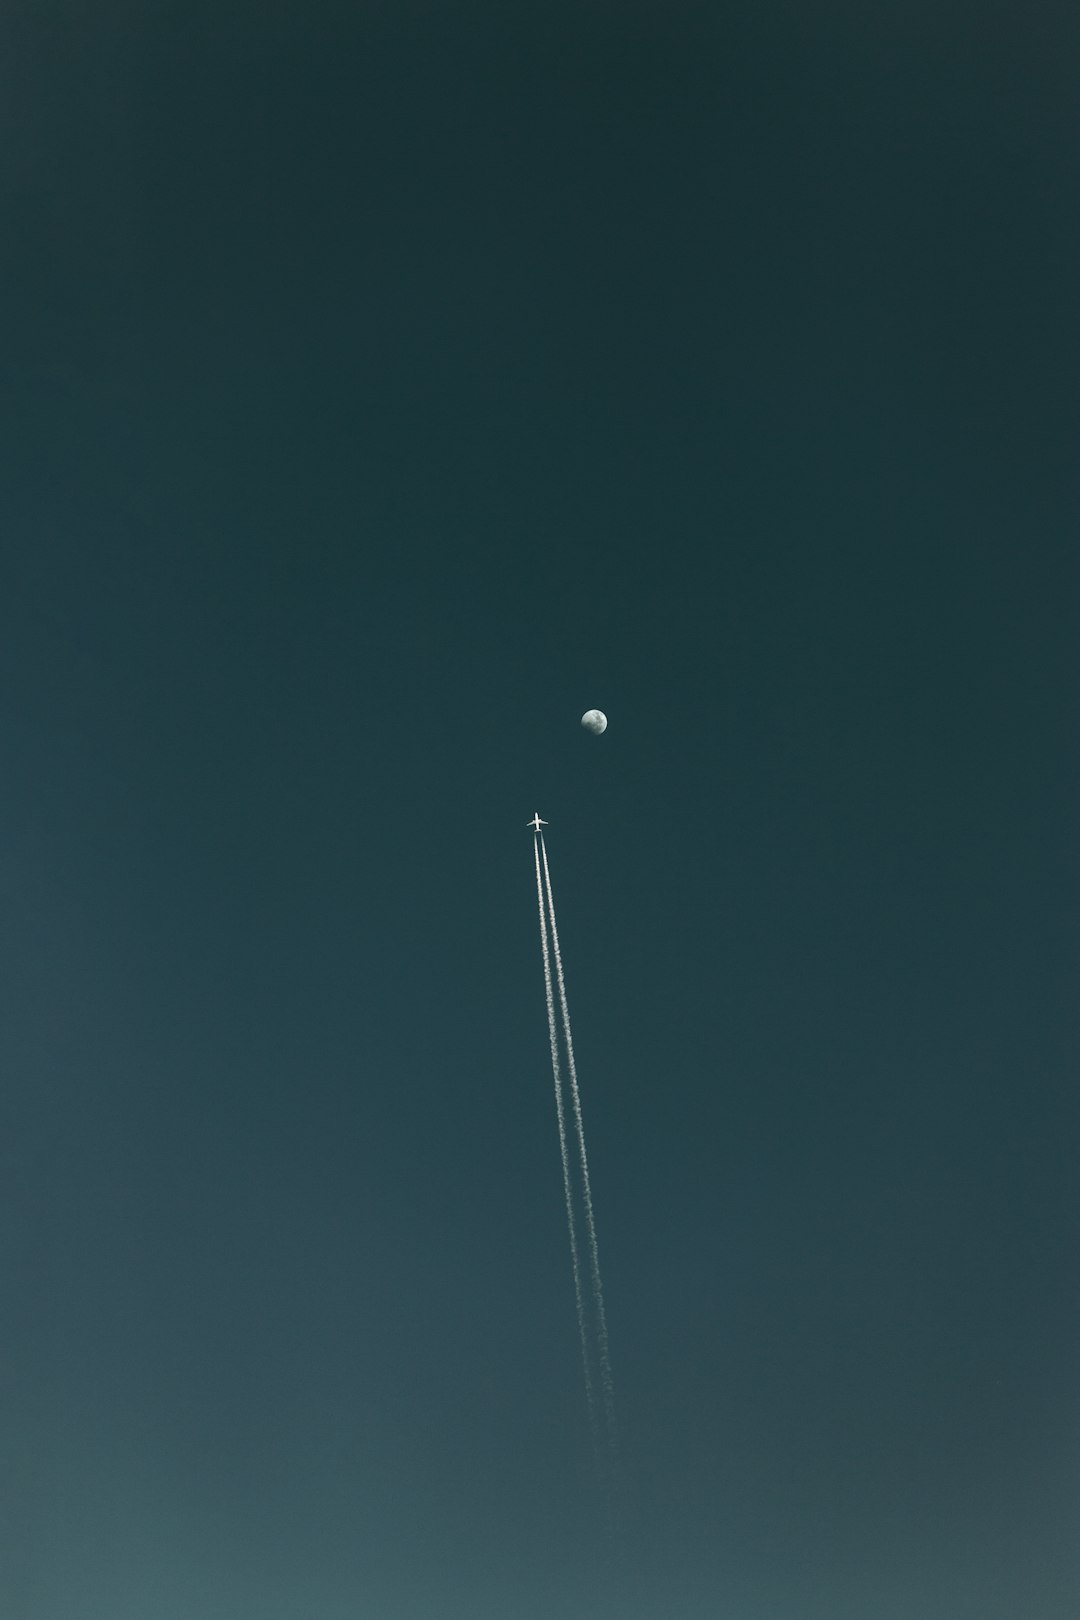 flying plane with contrail during nighttime